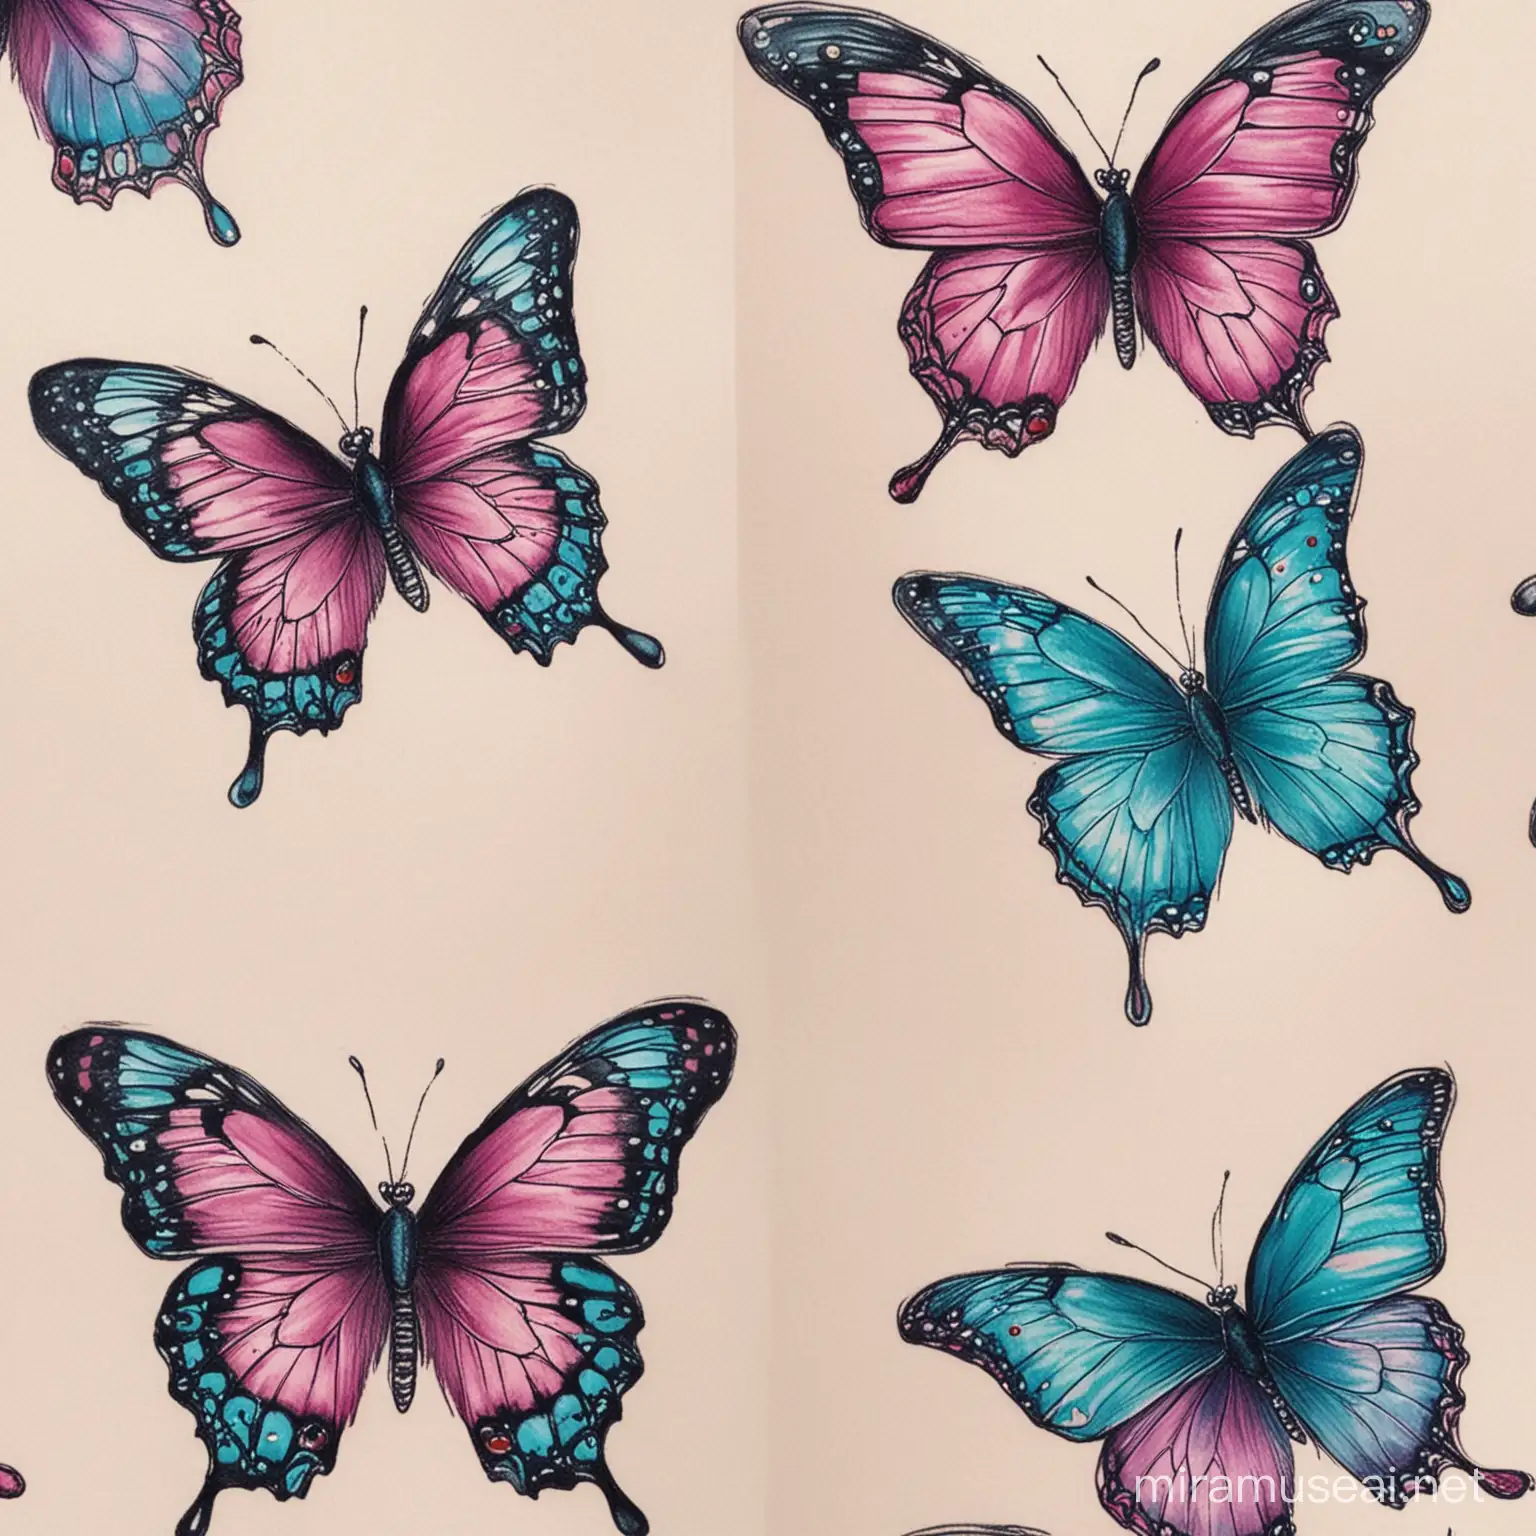 Vibrant Butterfly Tattoos in Aquamarine and Magenta